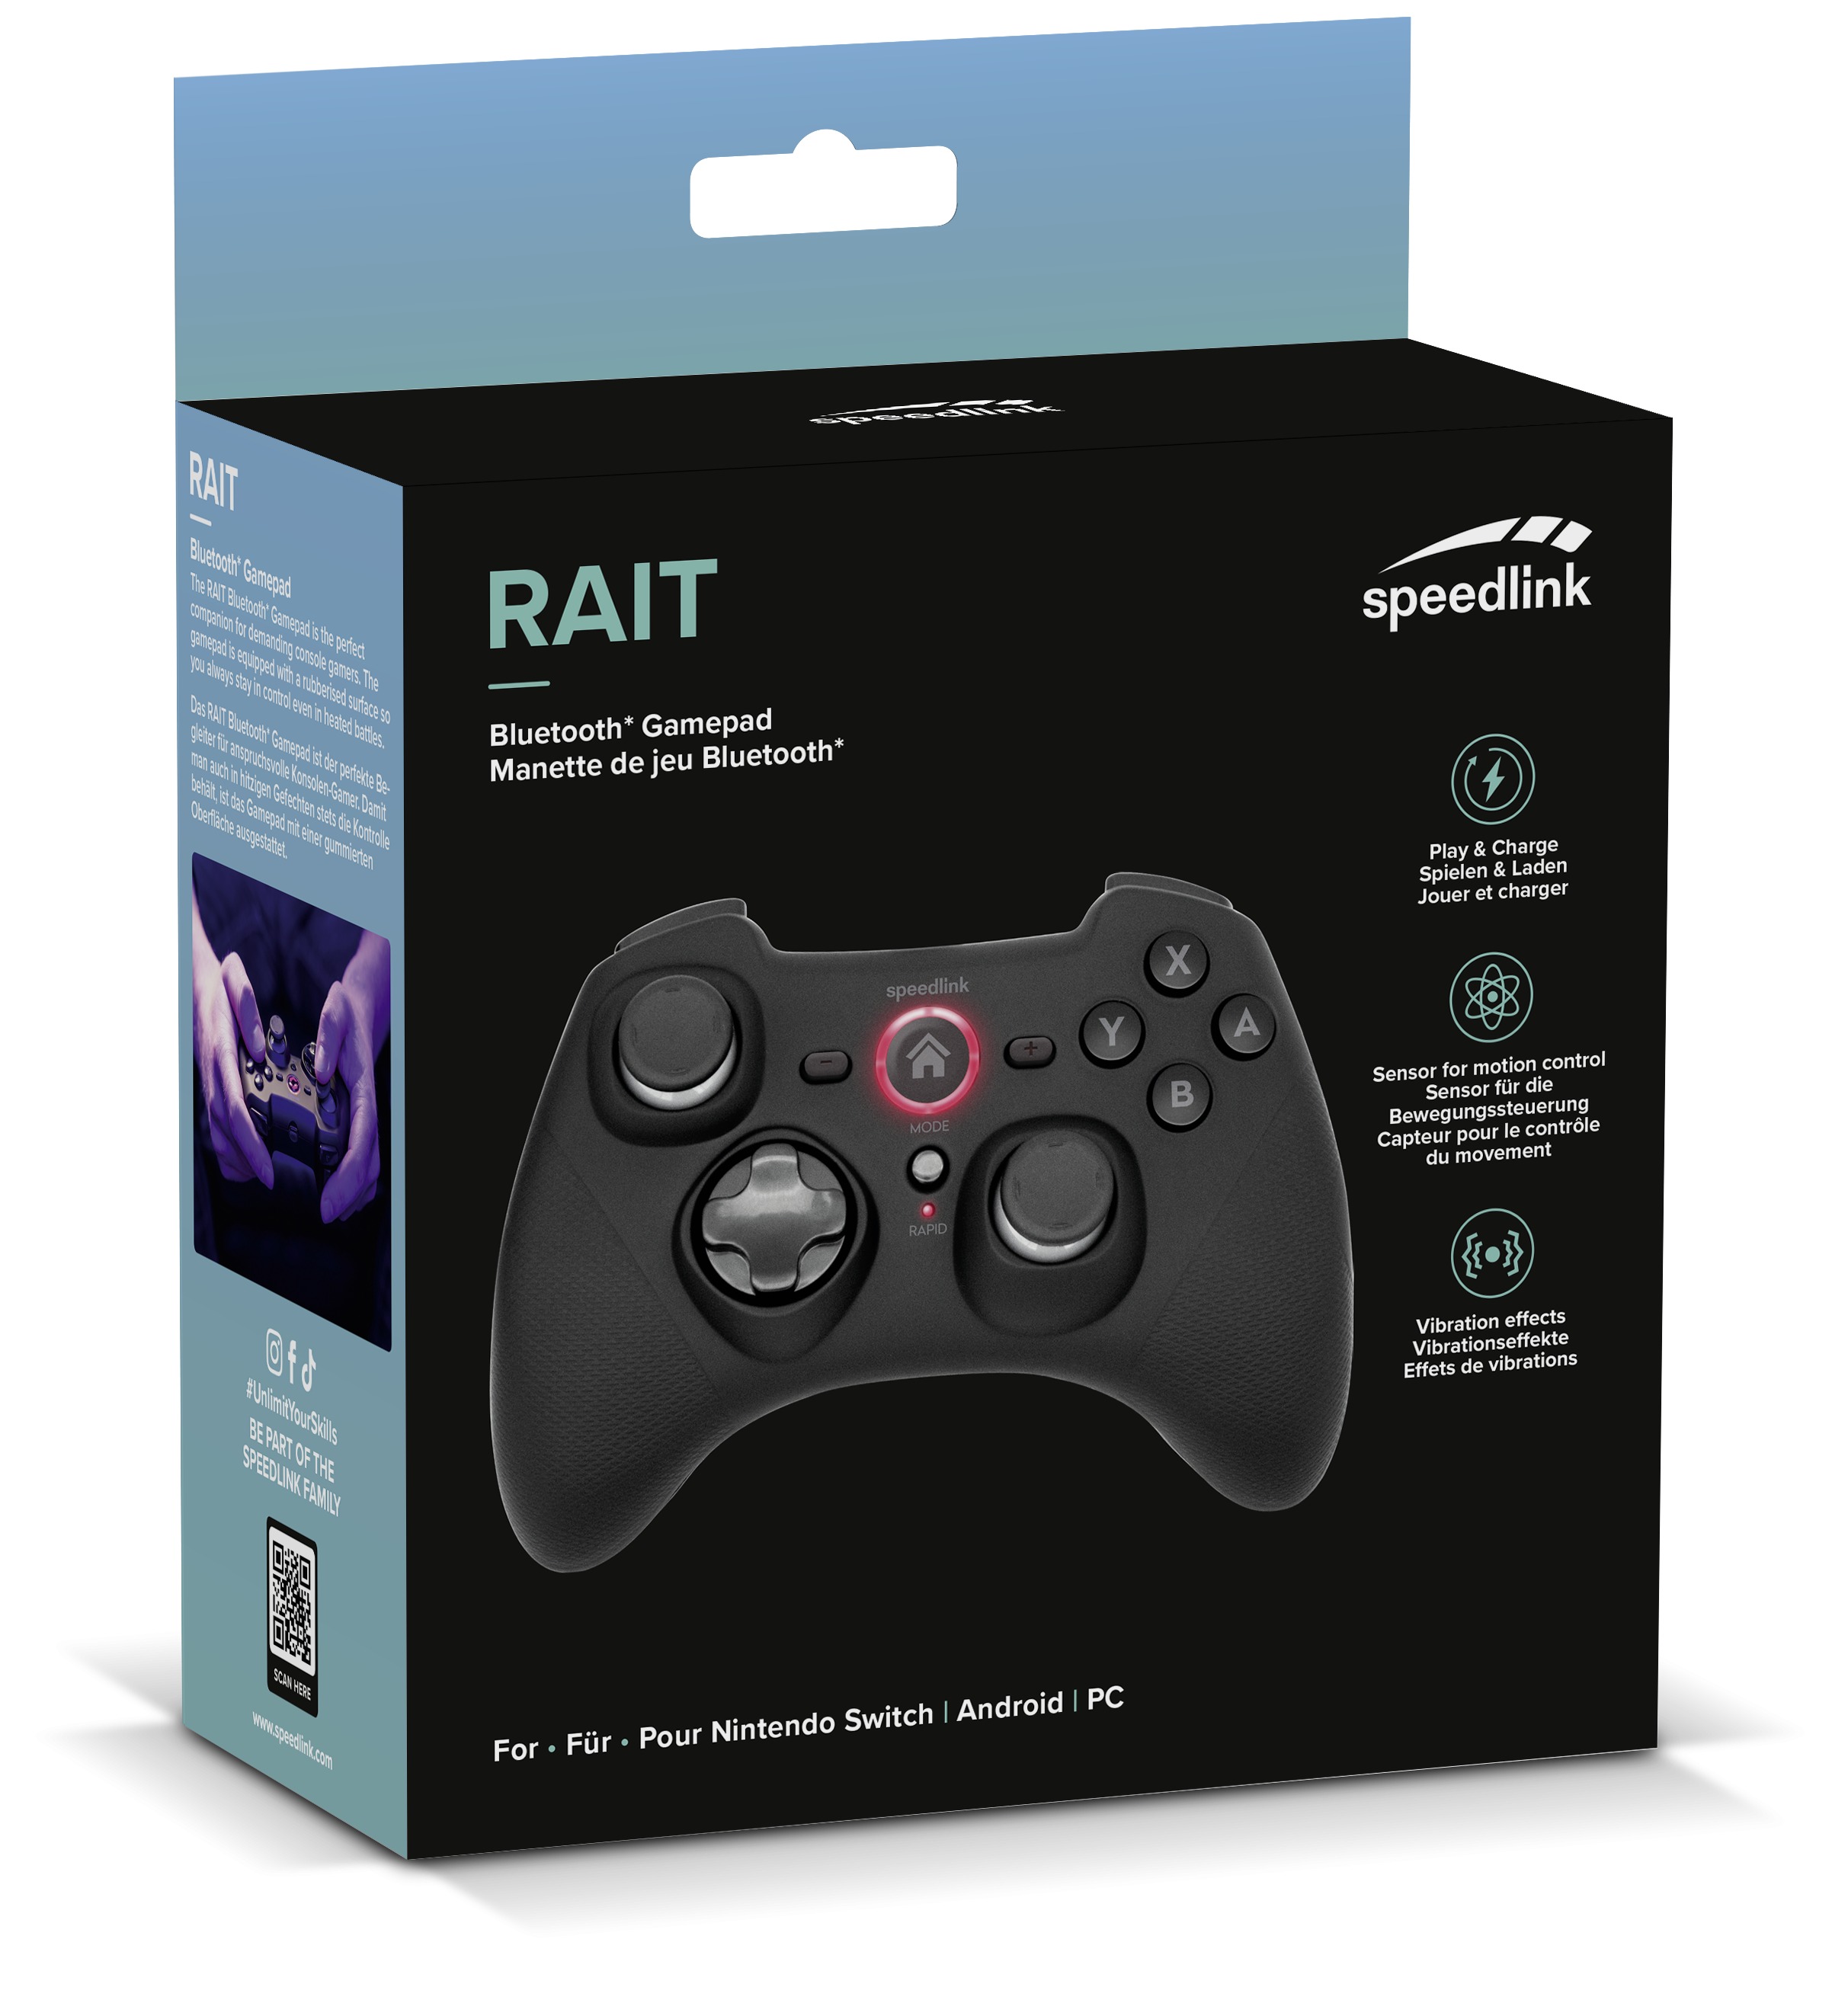 RAIT Bluetooth rubber-black Switch/OLED/PC/Android, | Nintendo Gamepad for SL-330402-RRBK 